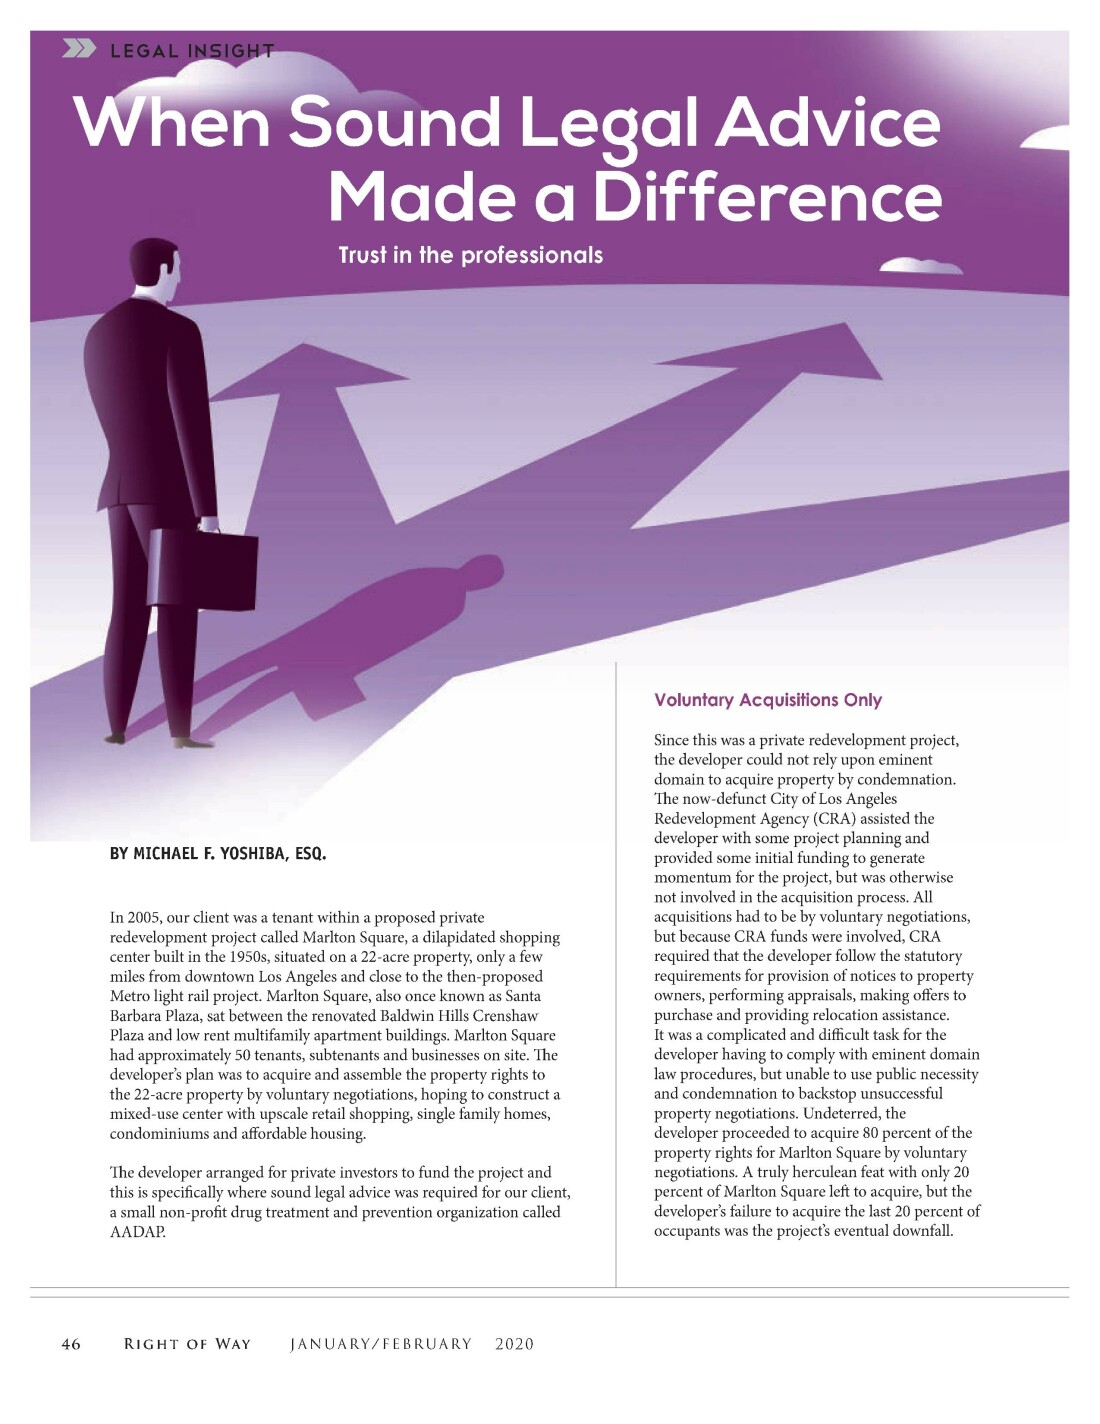 Michael Yoshiba - When Sound Legal Advice Made a Difference - Right of Way Magazine